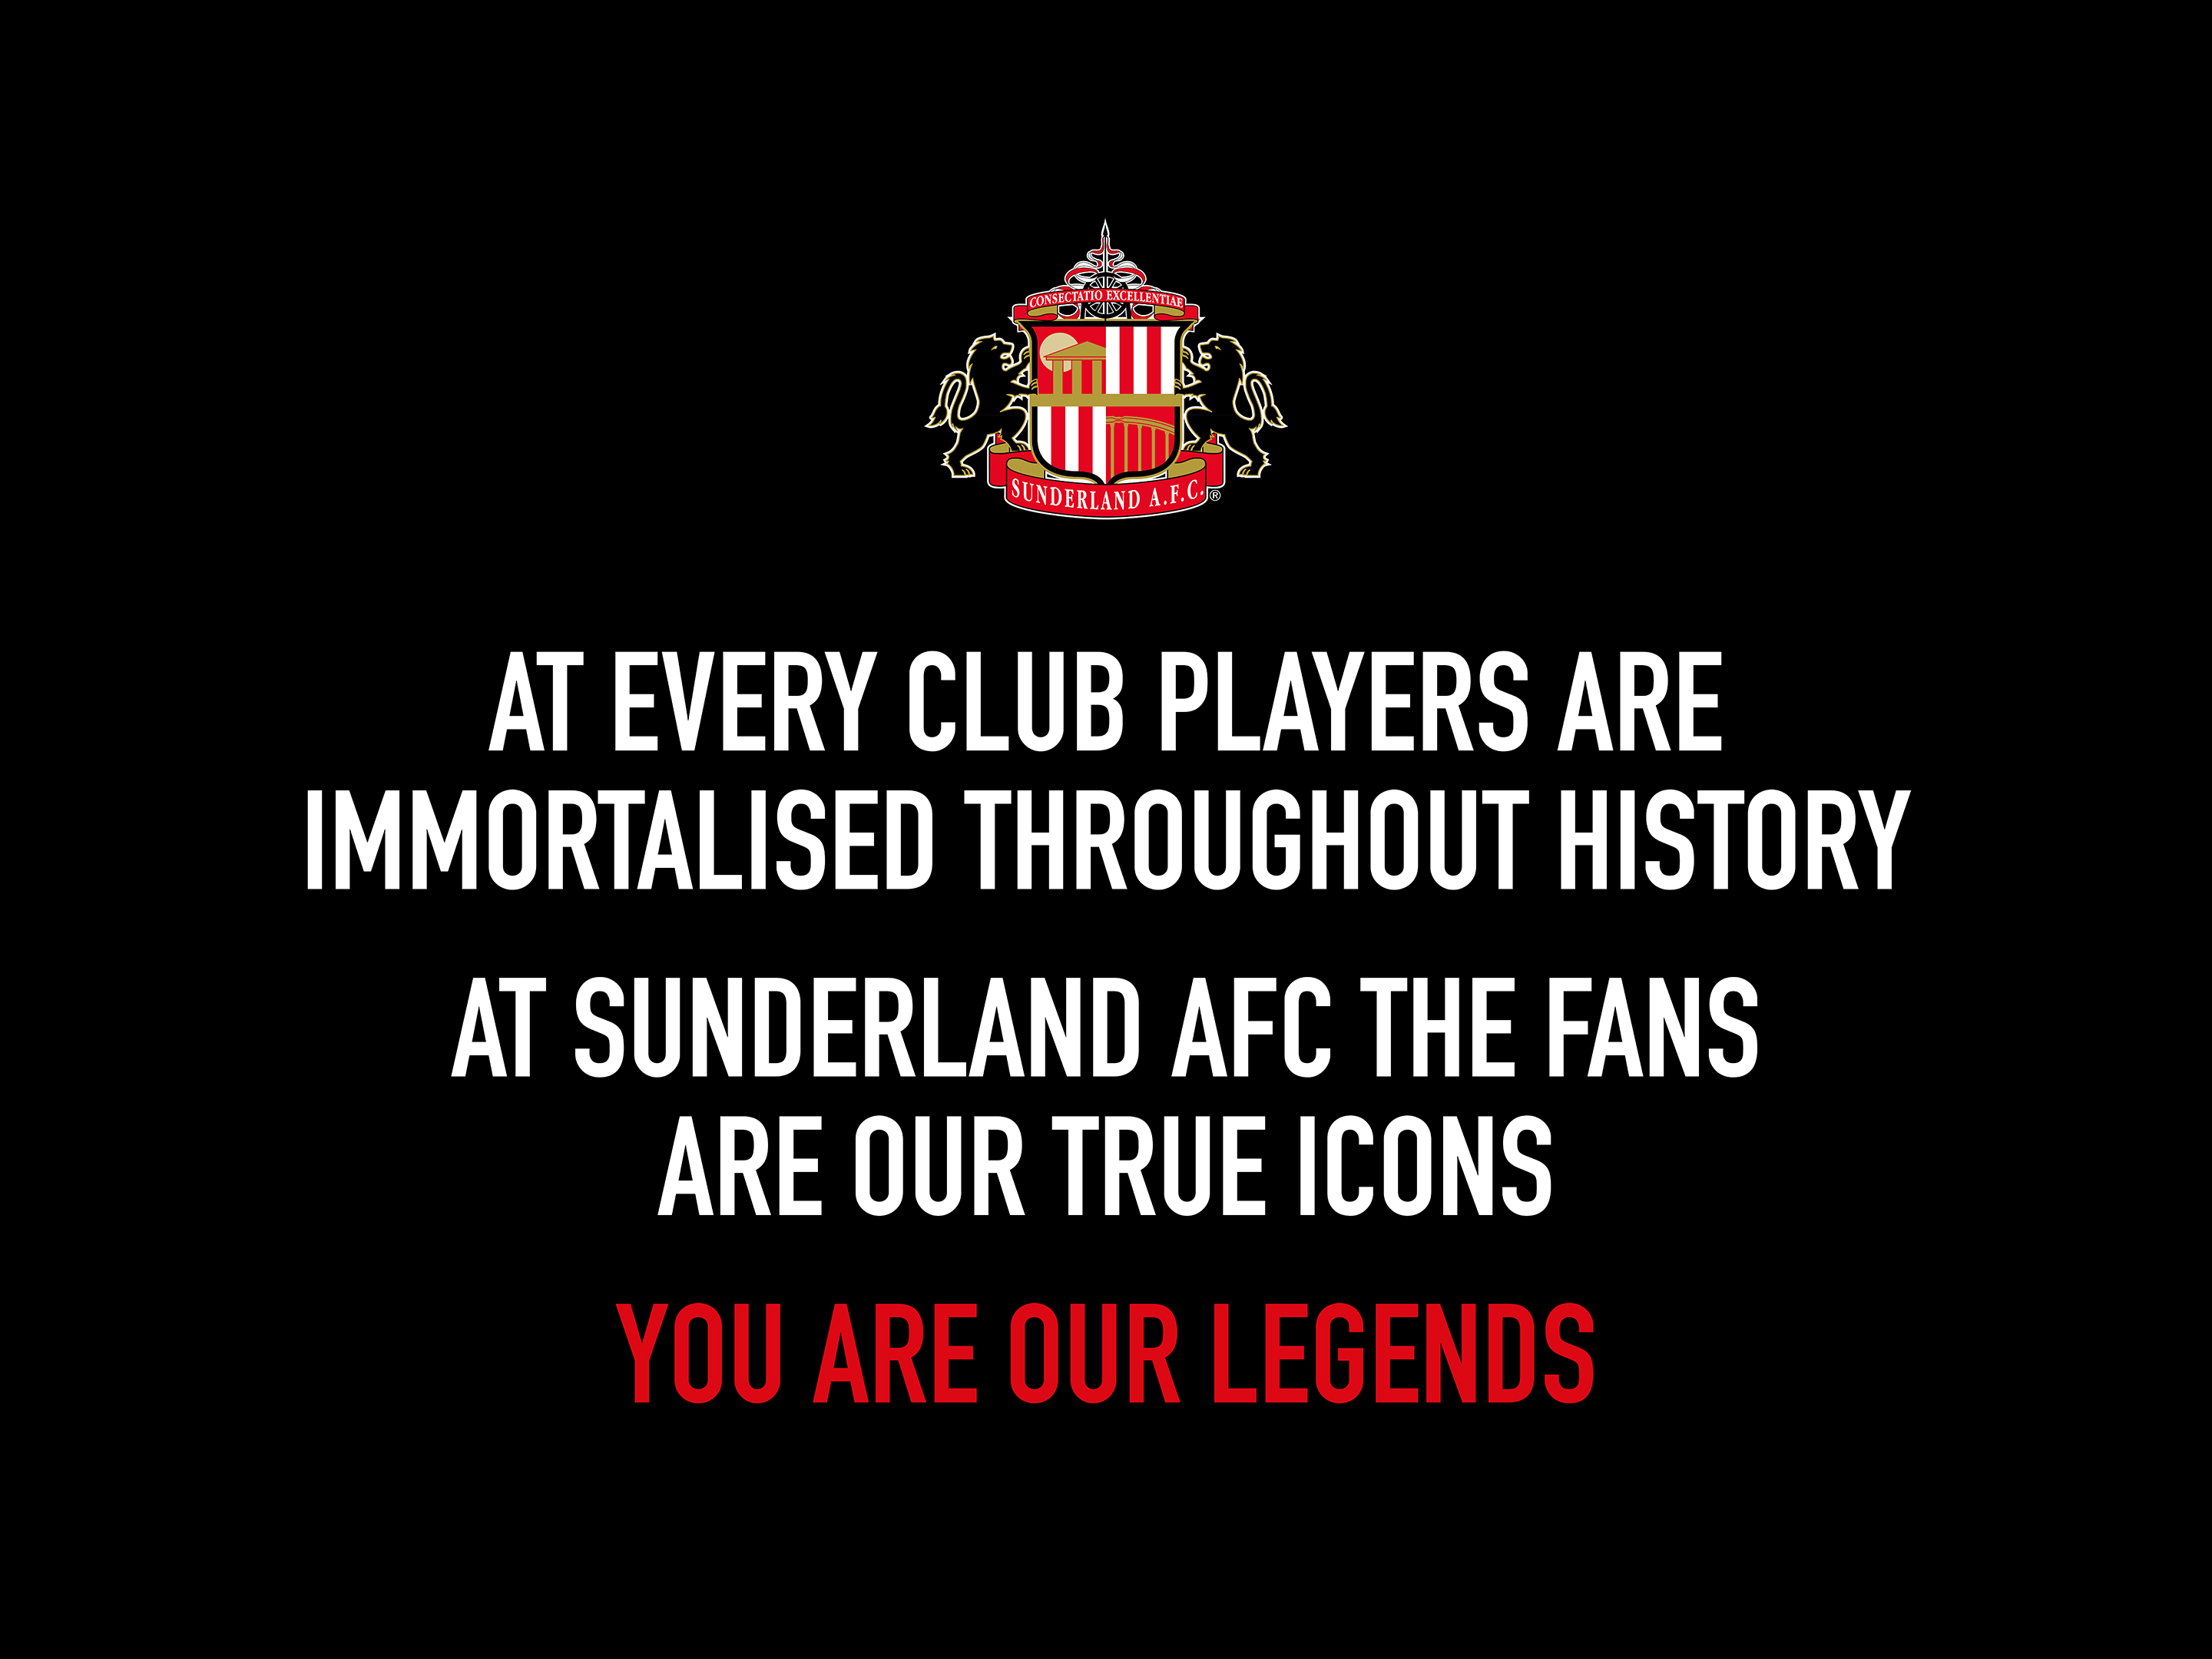 Sunderland AFC (another one)